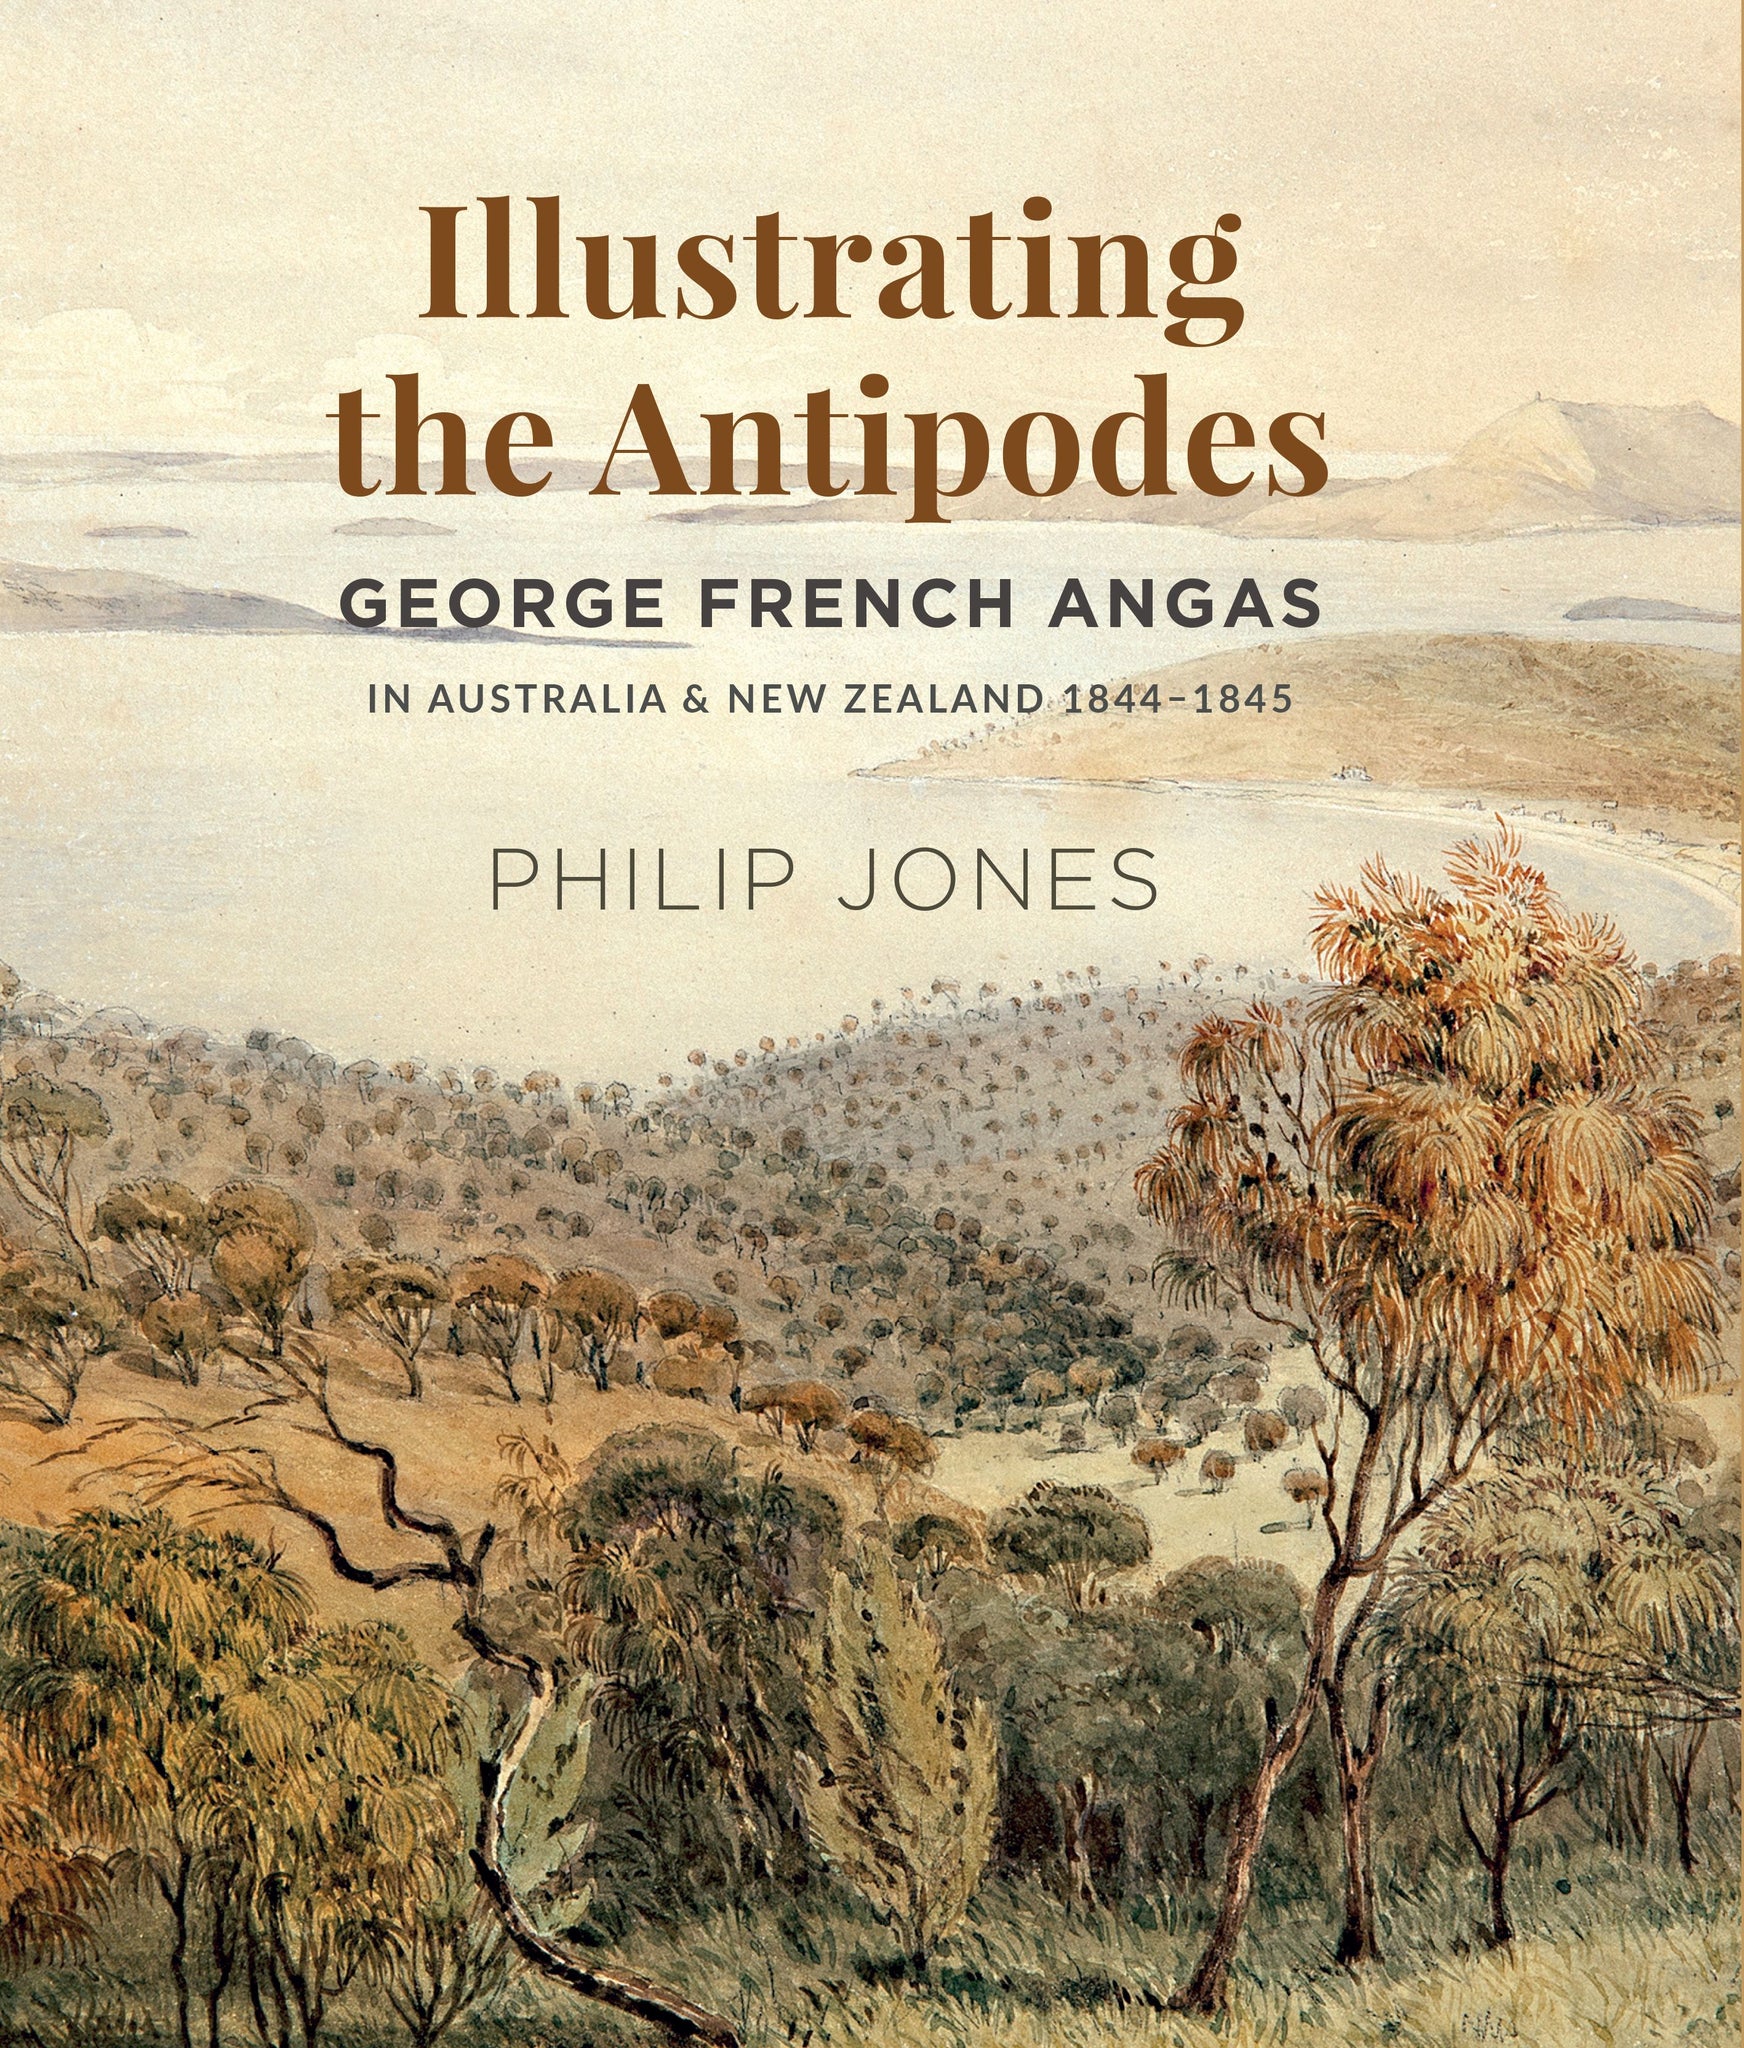 Illustrating the Antipodes: George French Angas in Australia and New Zealand 1844-1845